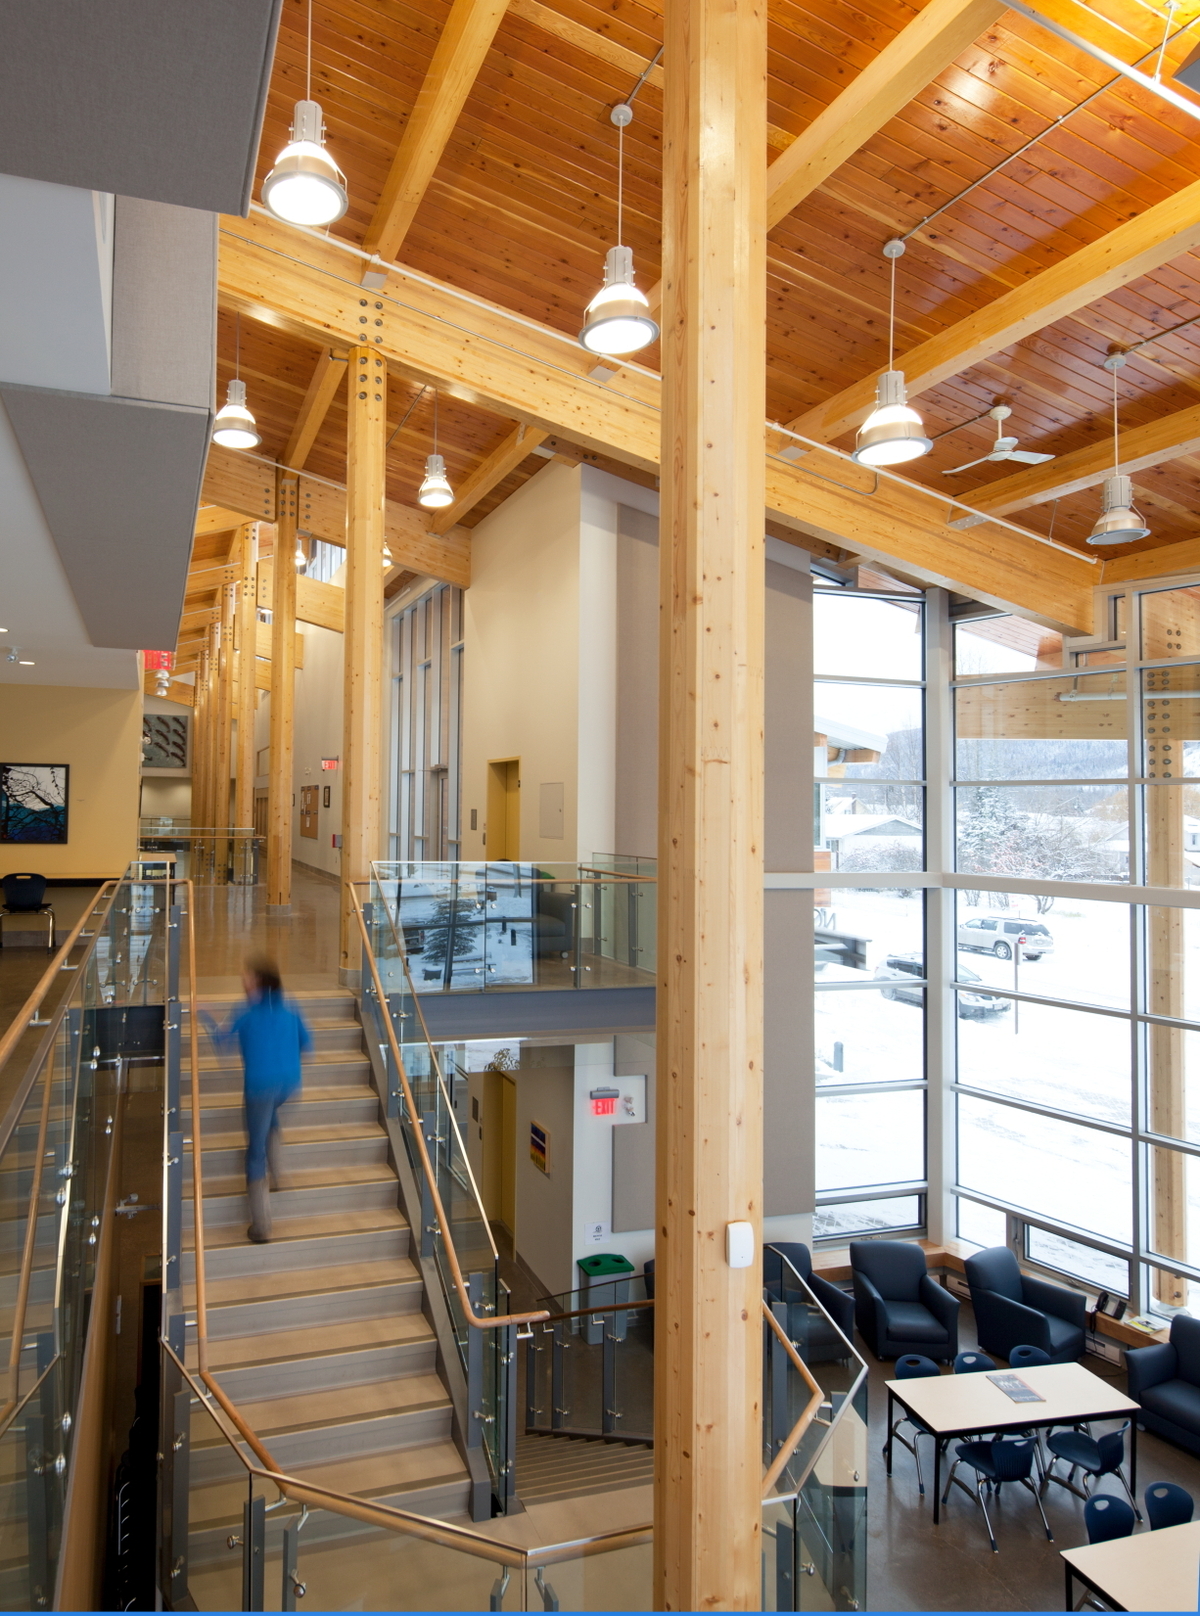 Interior daytime view of low rise hybrid construction Coast Mountain College upper floor, showing extensive use of glue-laminated timber (glulam), siding, solid-sawn heavy timber